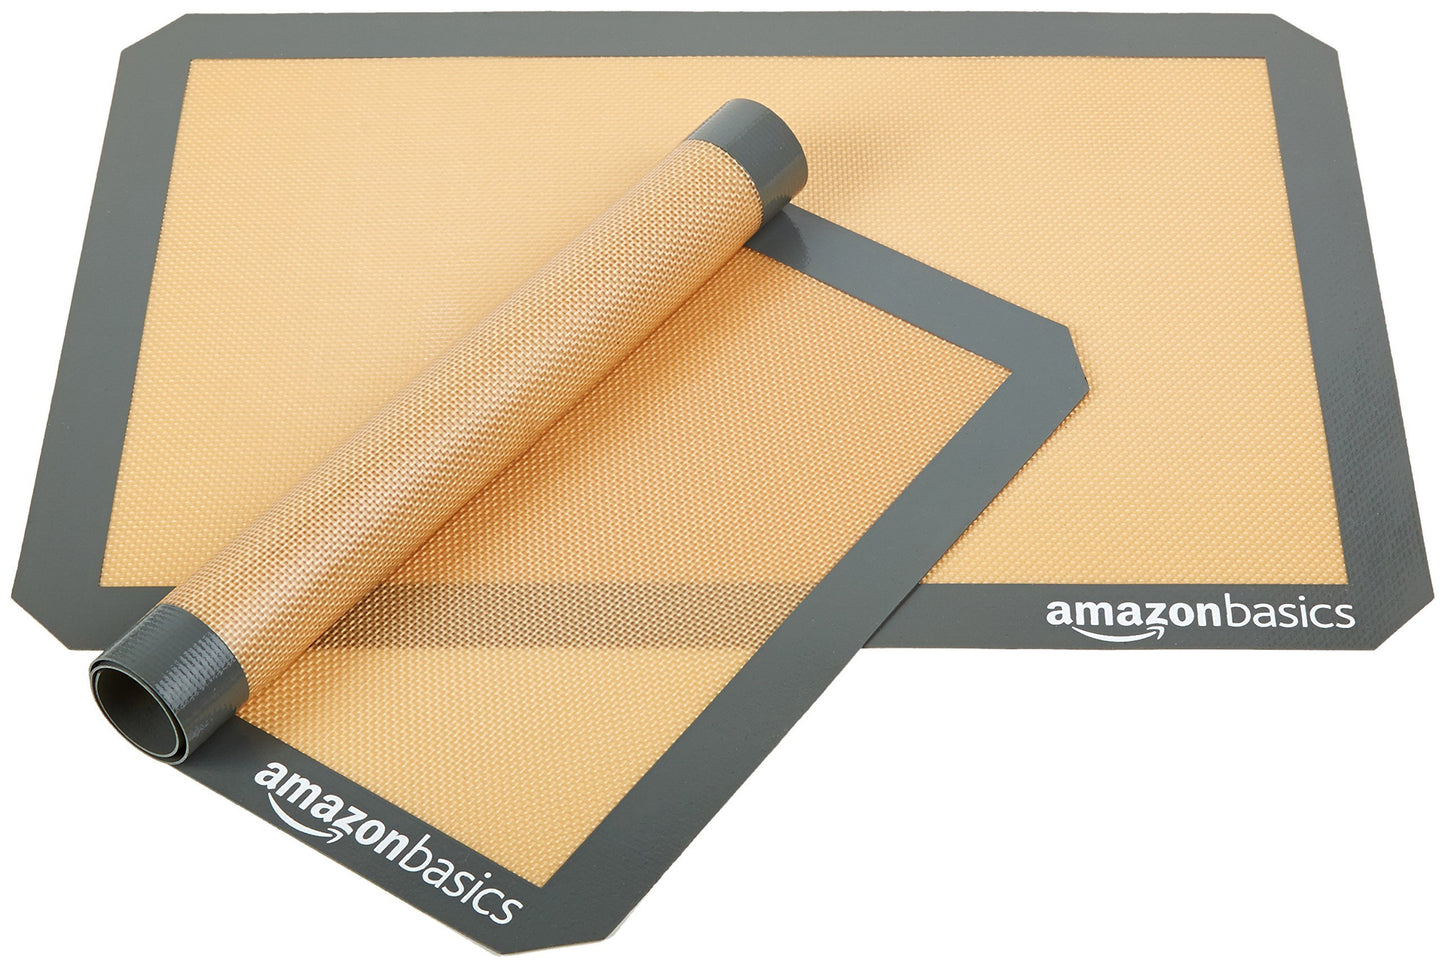 Silicone Baking Mats - Pack of 2, Beige/Gray, Non-Stick, Oven-Safe